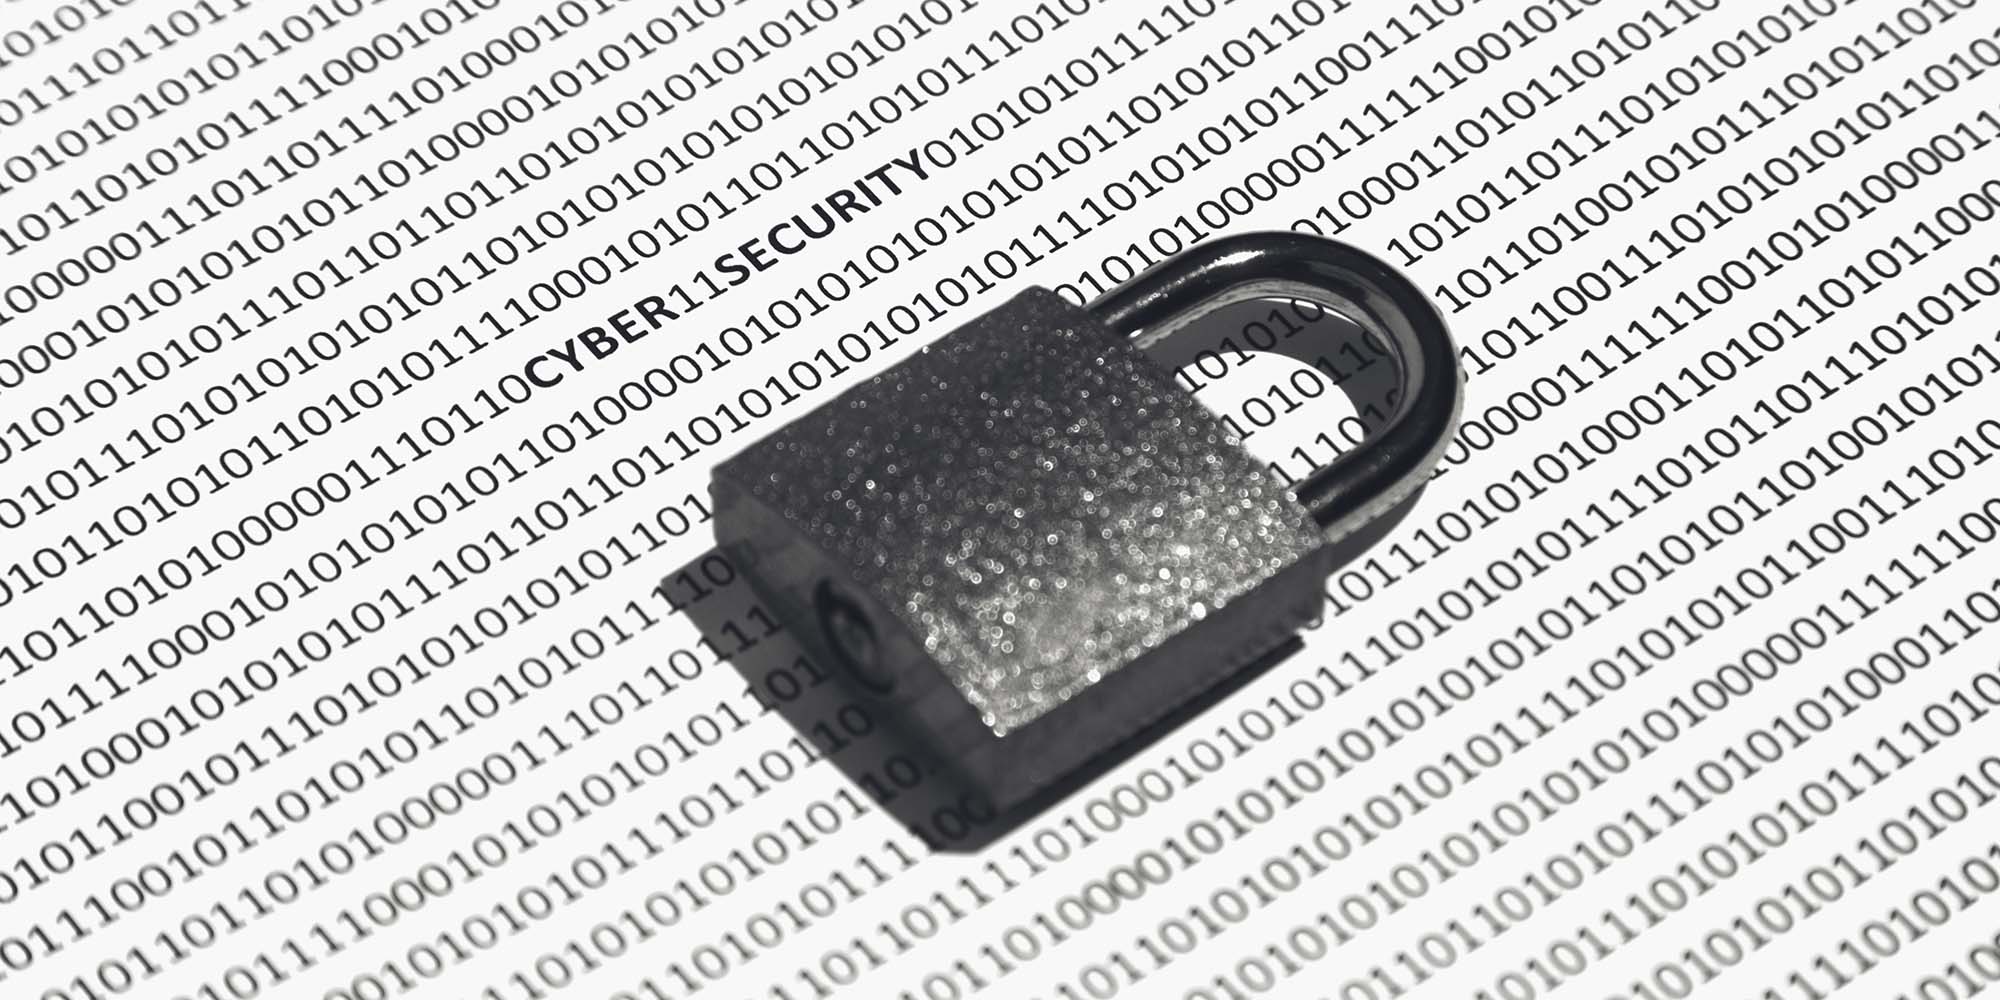 Benefits and risks of using an optional passphrase